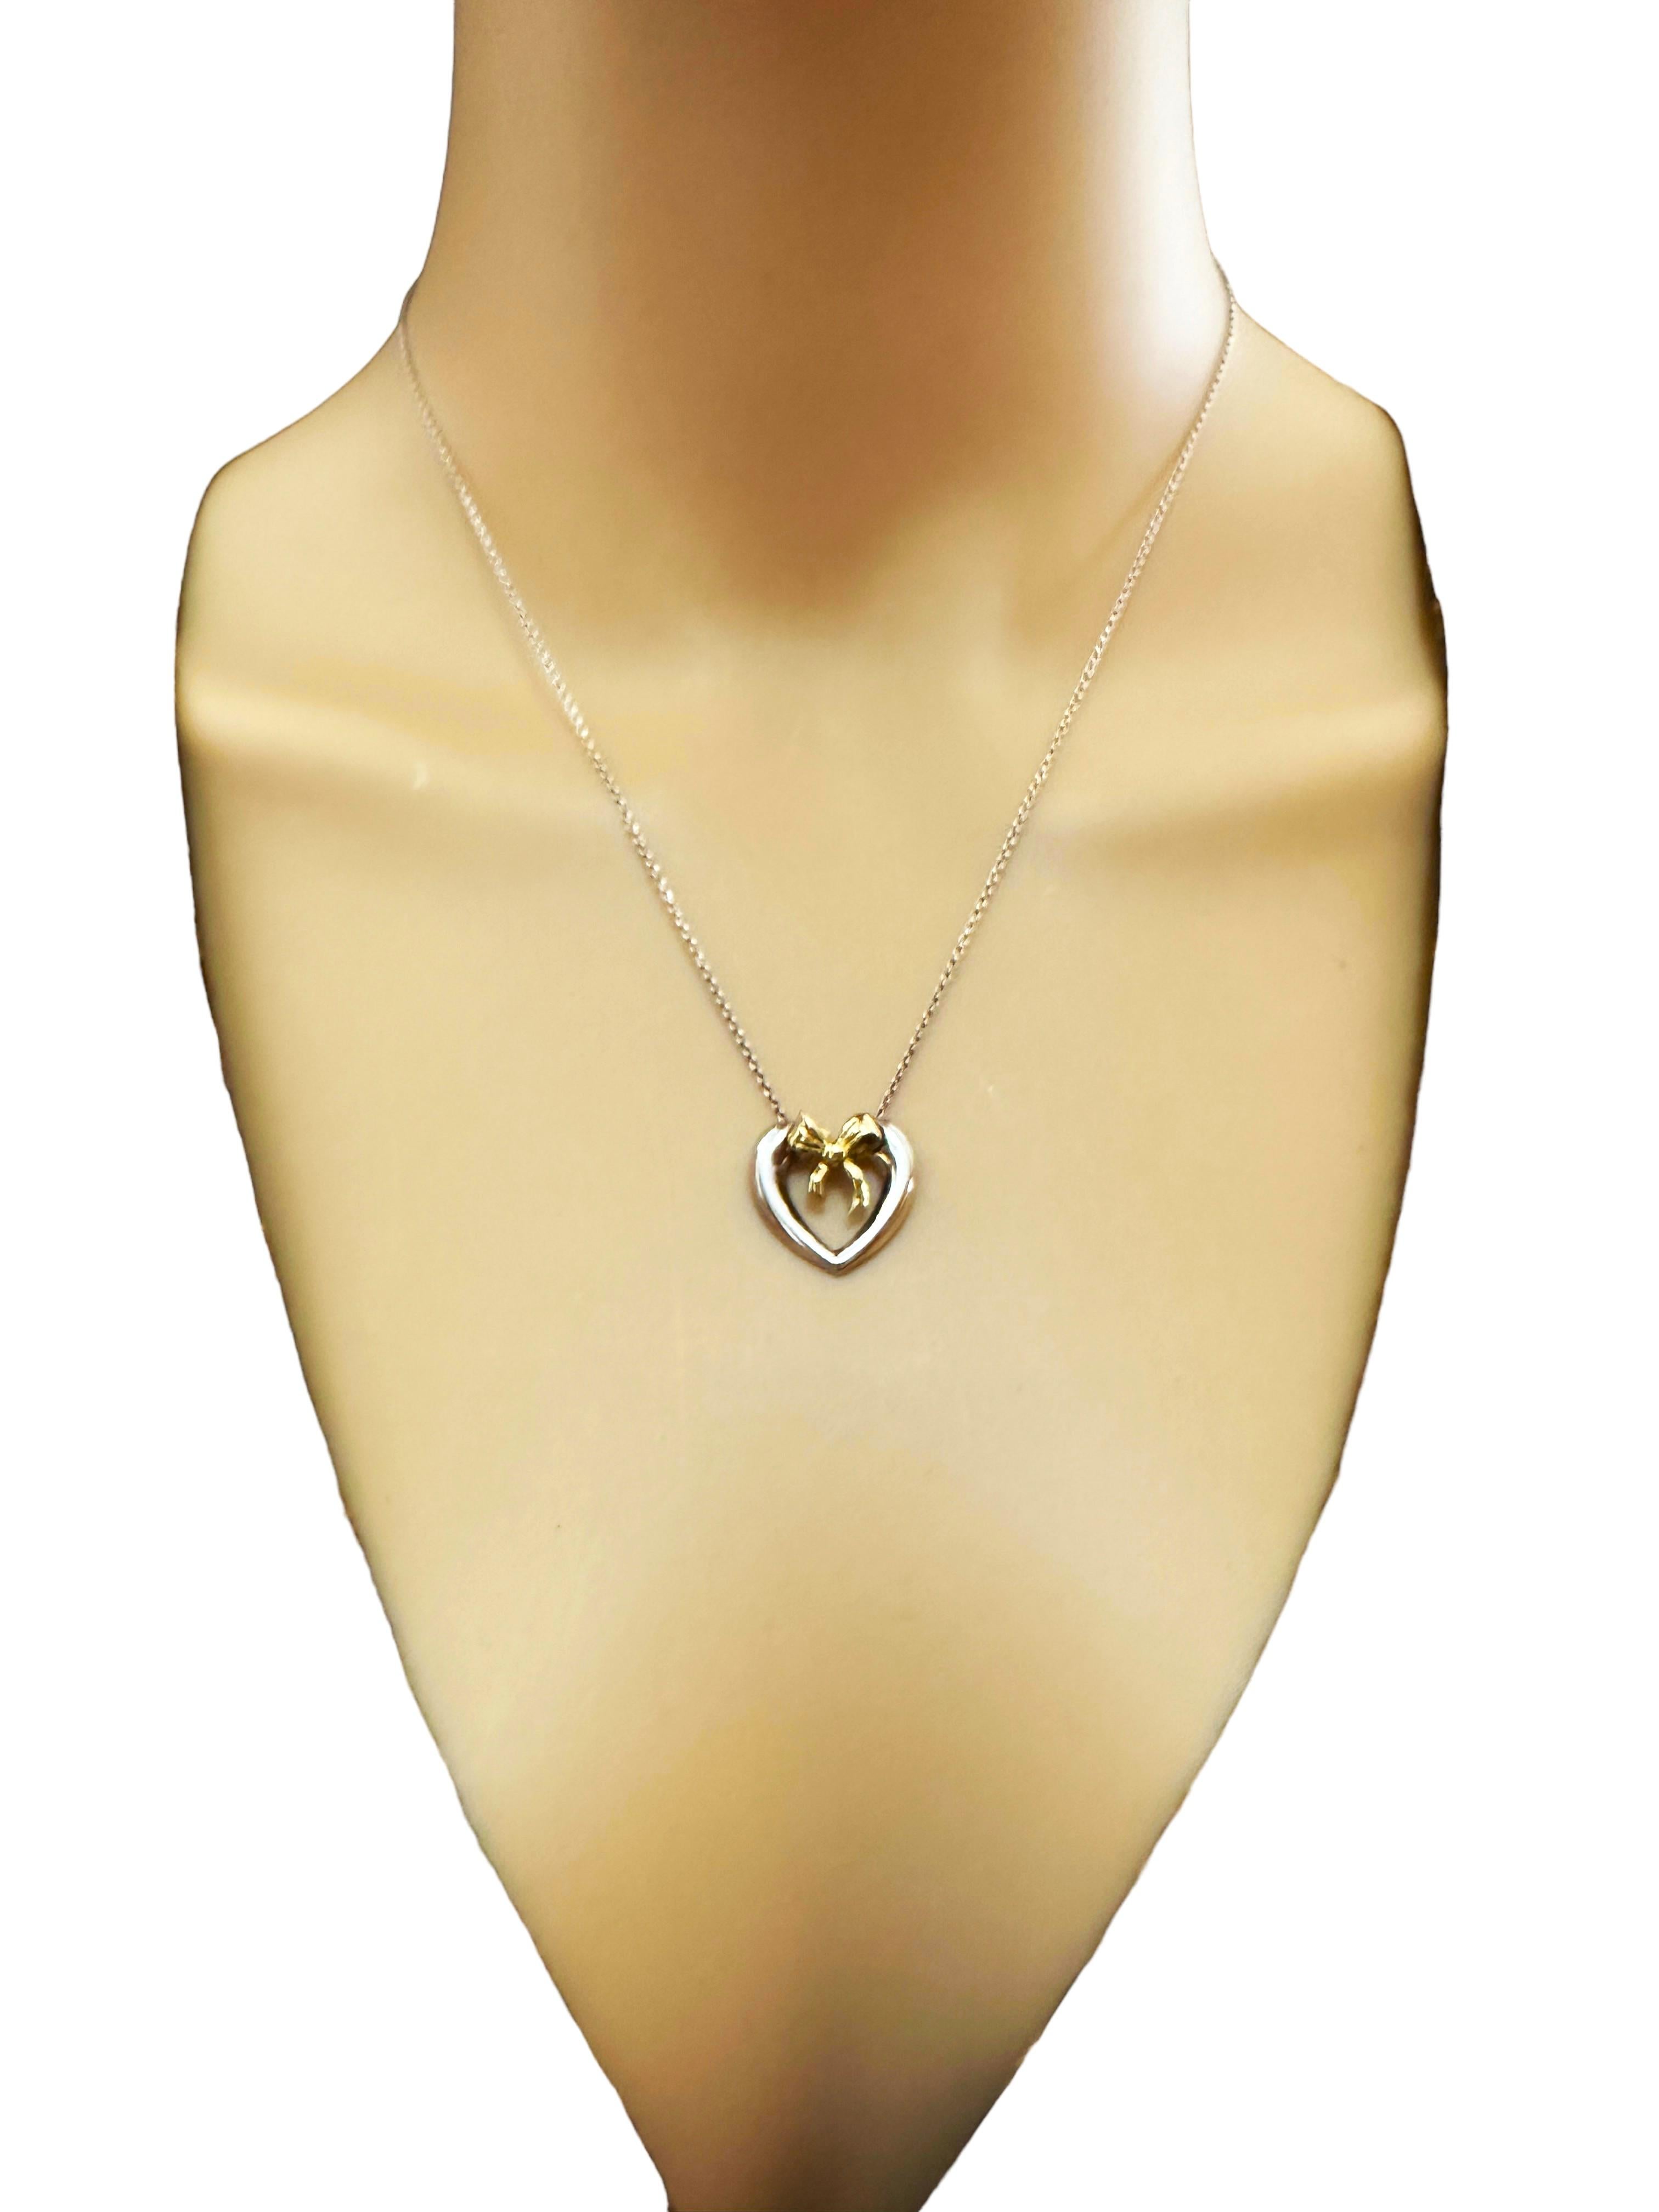 Art Deco Vintage 1991 Tiffany & Co. 18K Gold Bow Sterling Silver Heart Necklace